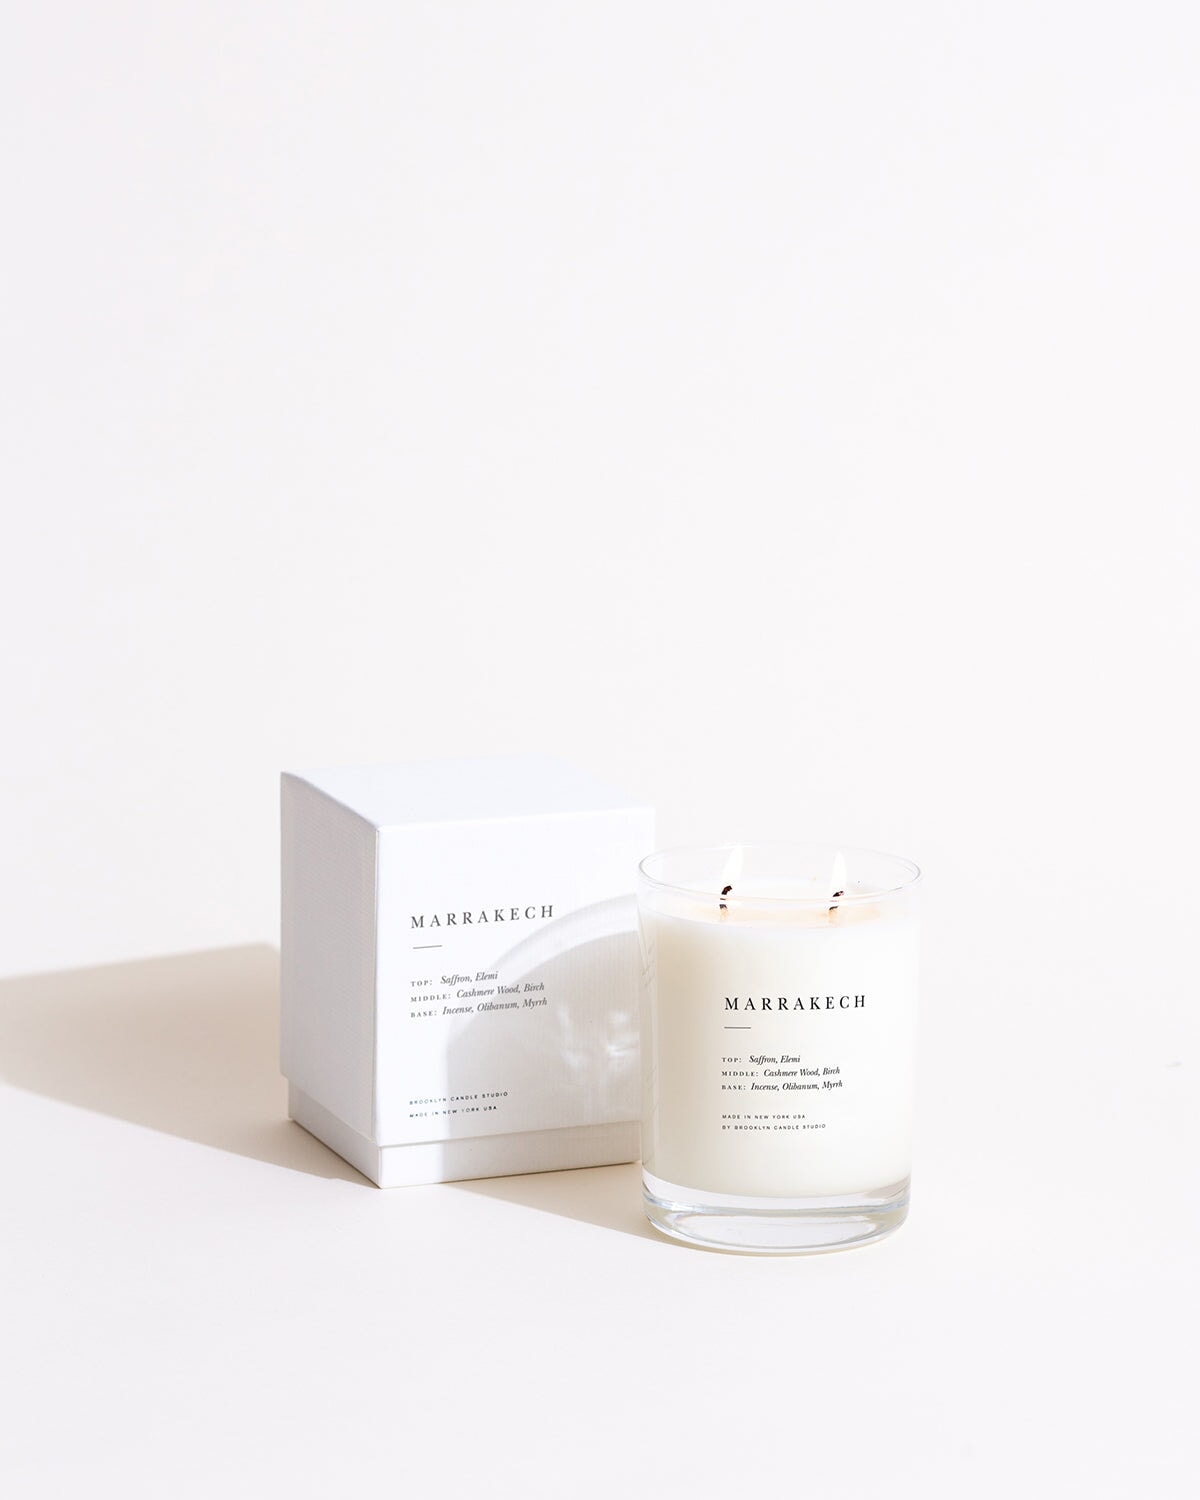 Marrakech Escapist Candle by Brooklyn Candle Studio